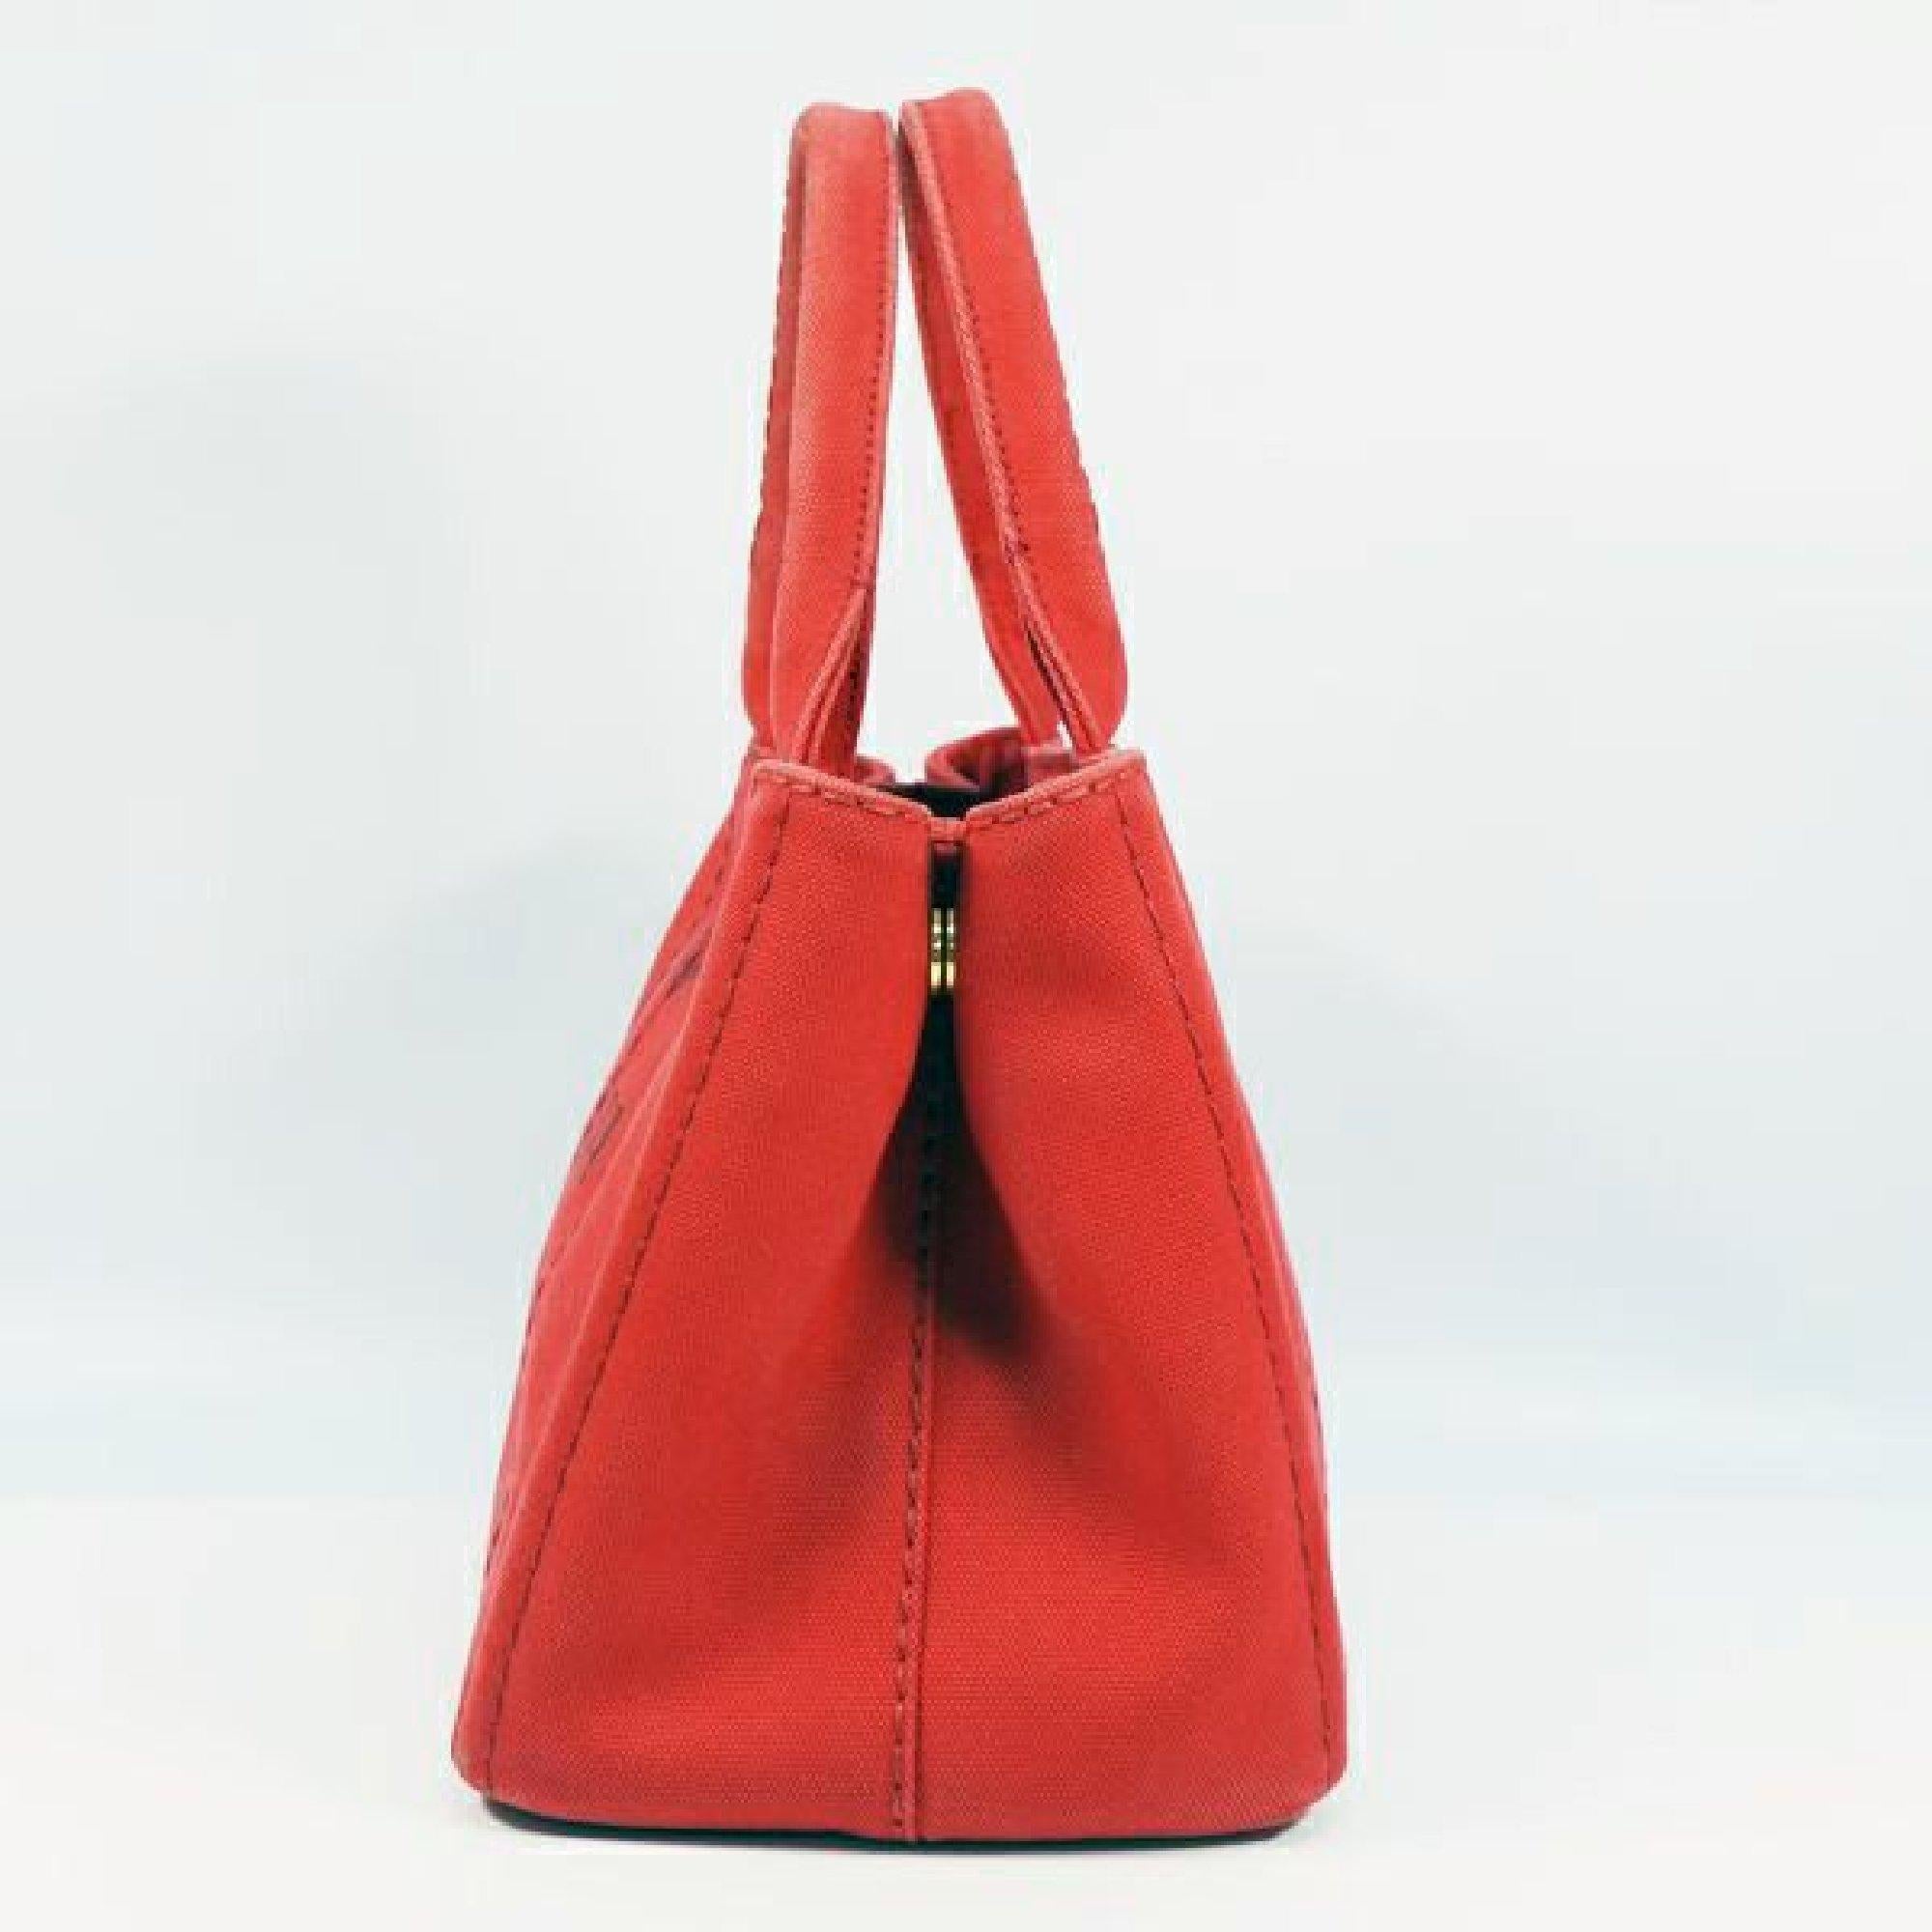 An authentic PRADA Canapa2WAY Womens tote bag ROSSO/ red. The color is ROSSO/ red. The outside material is Canvas. The pattern is Canapa2WAY. This item is Contemporary. The year of manufacture would be 1986.
Rank
AB signs of wear (Small)
Used